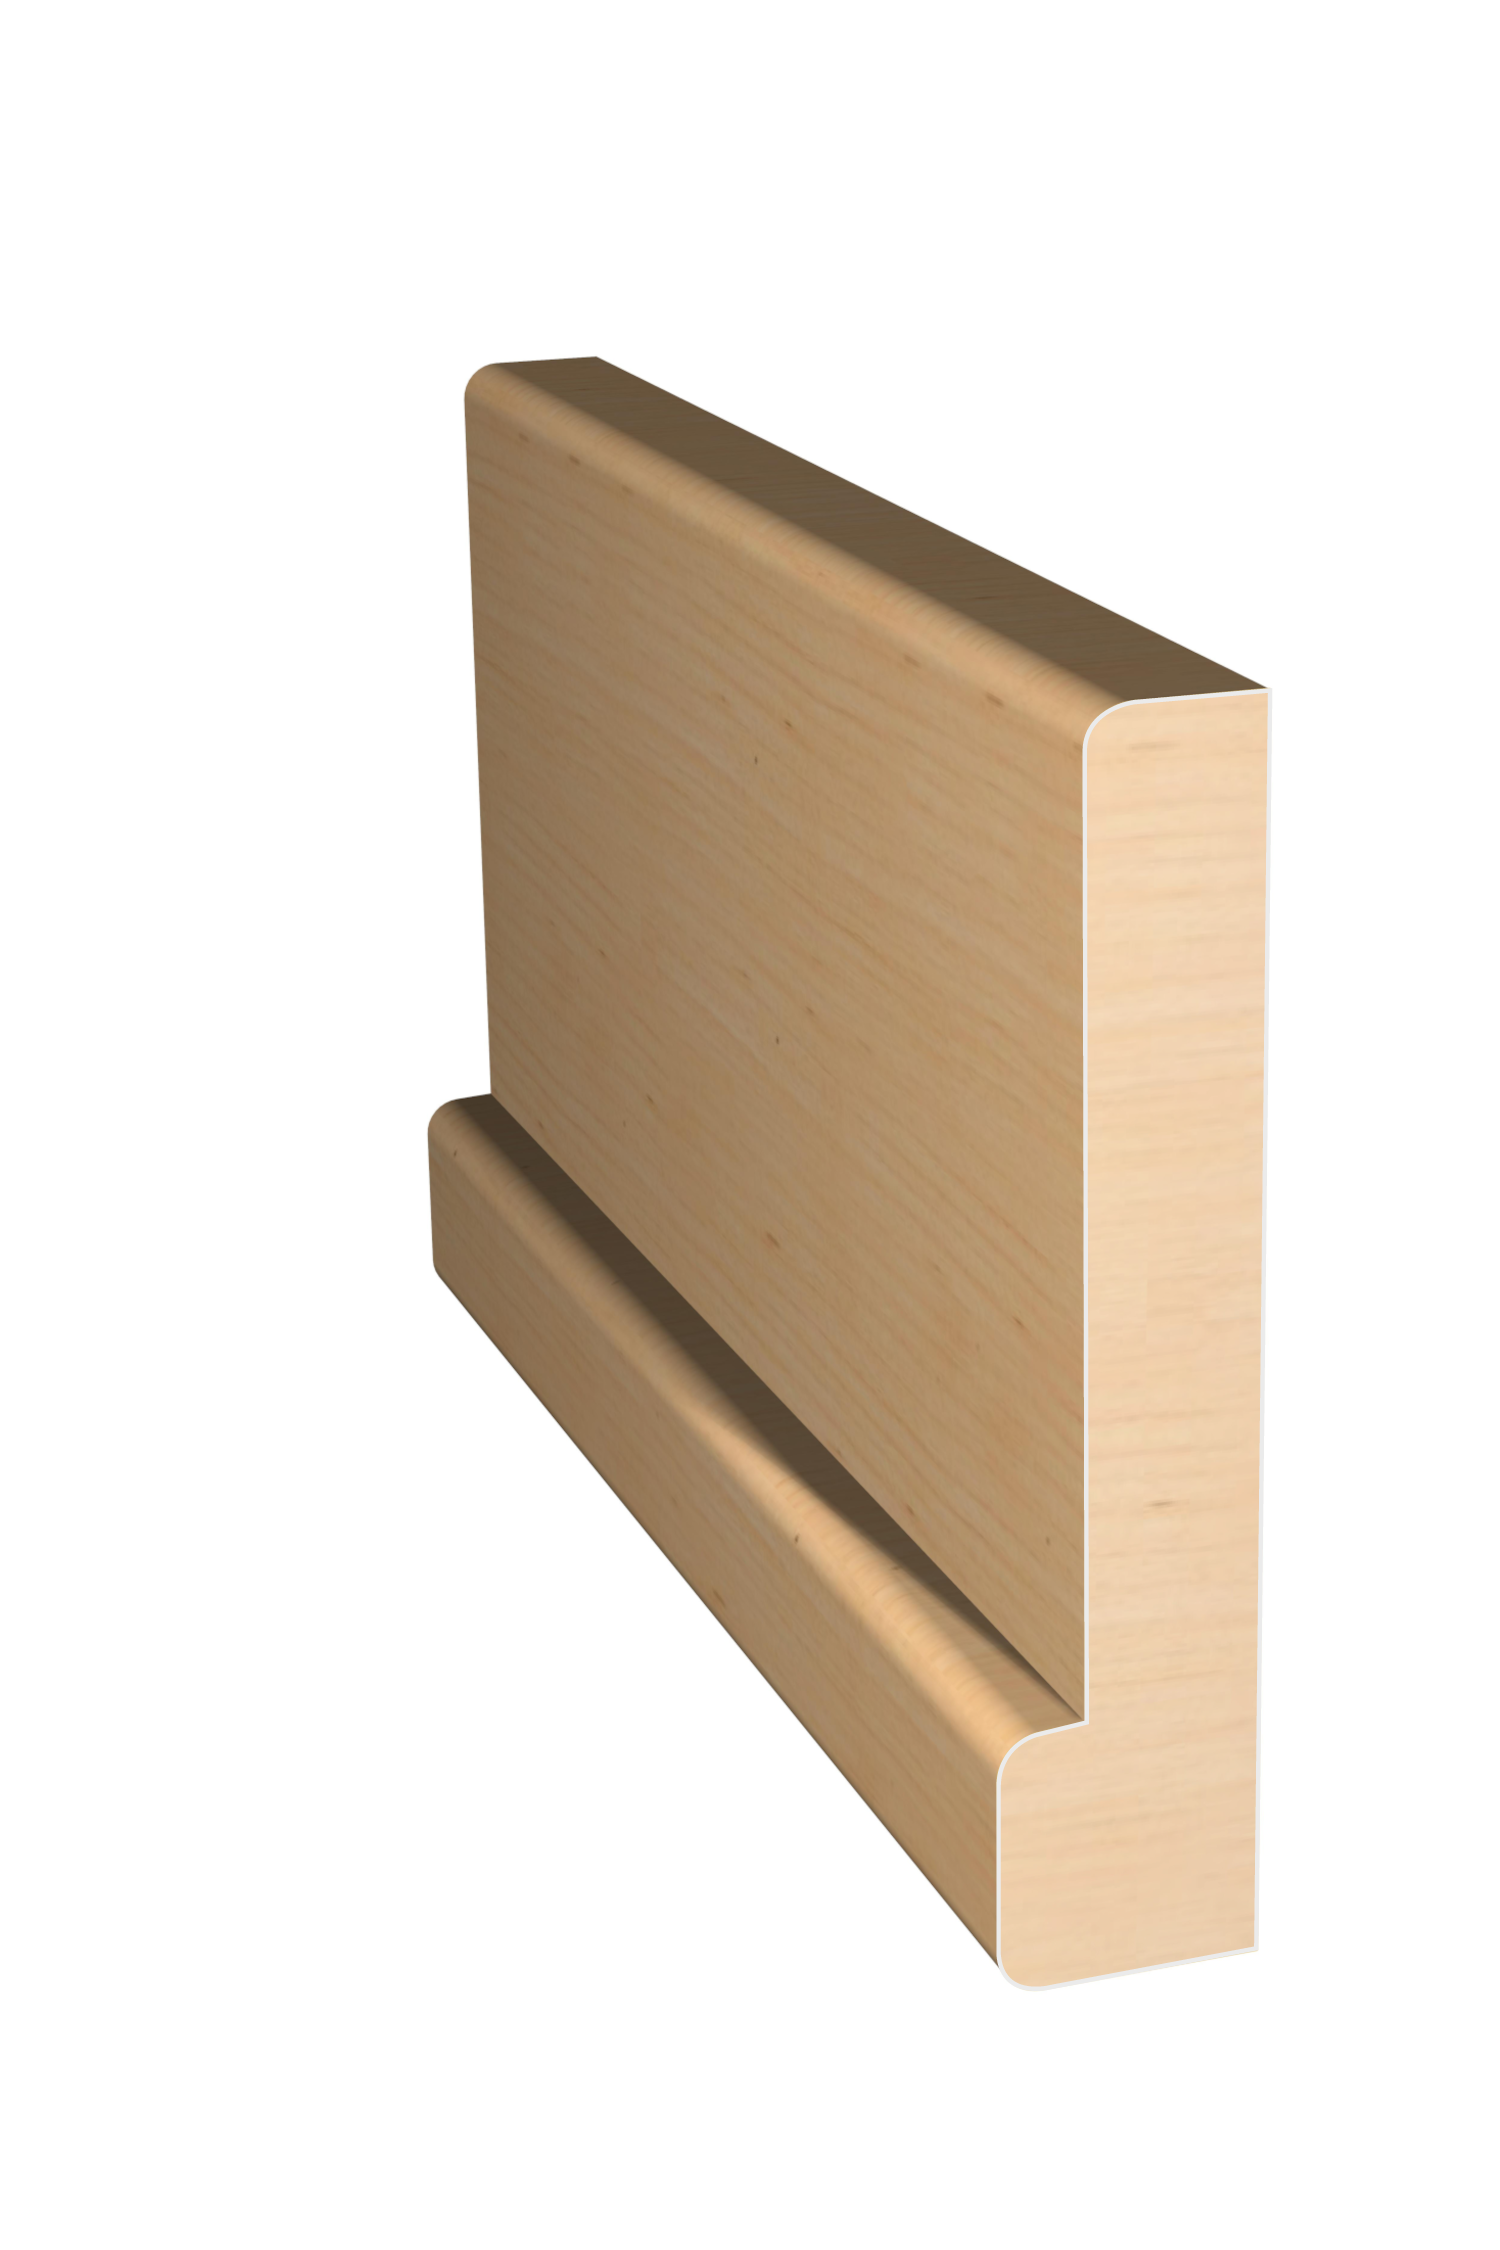 Three dimensional rendering of custom casing wood molding CAPL31229 made by Public Lumber Company in Detroit.